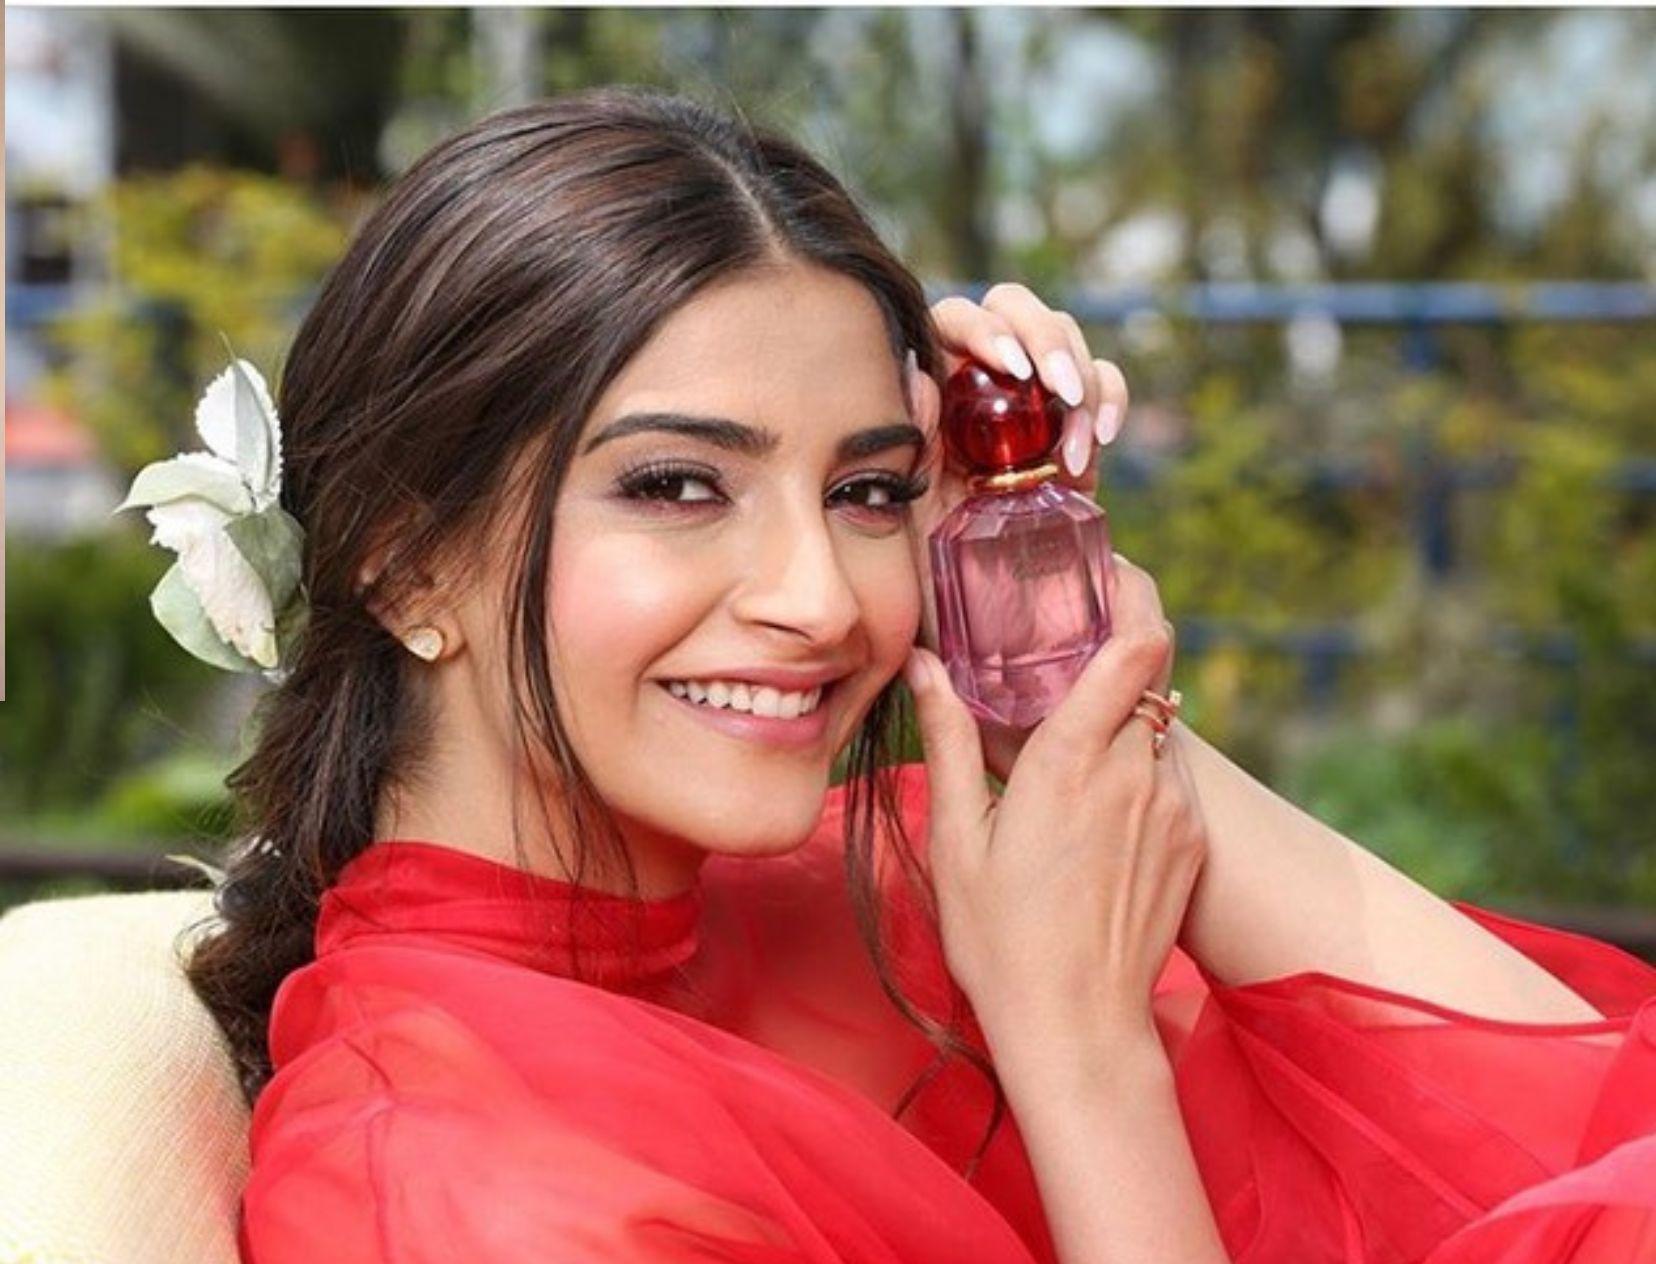 Parfum Or Eau de Toilette? A Guide To The Different Types Of Perfumes